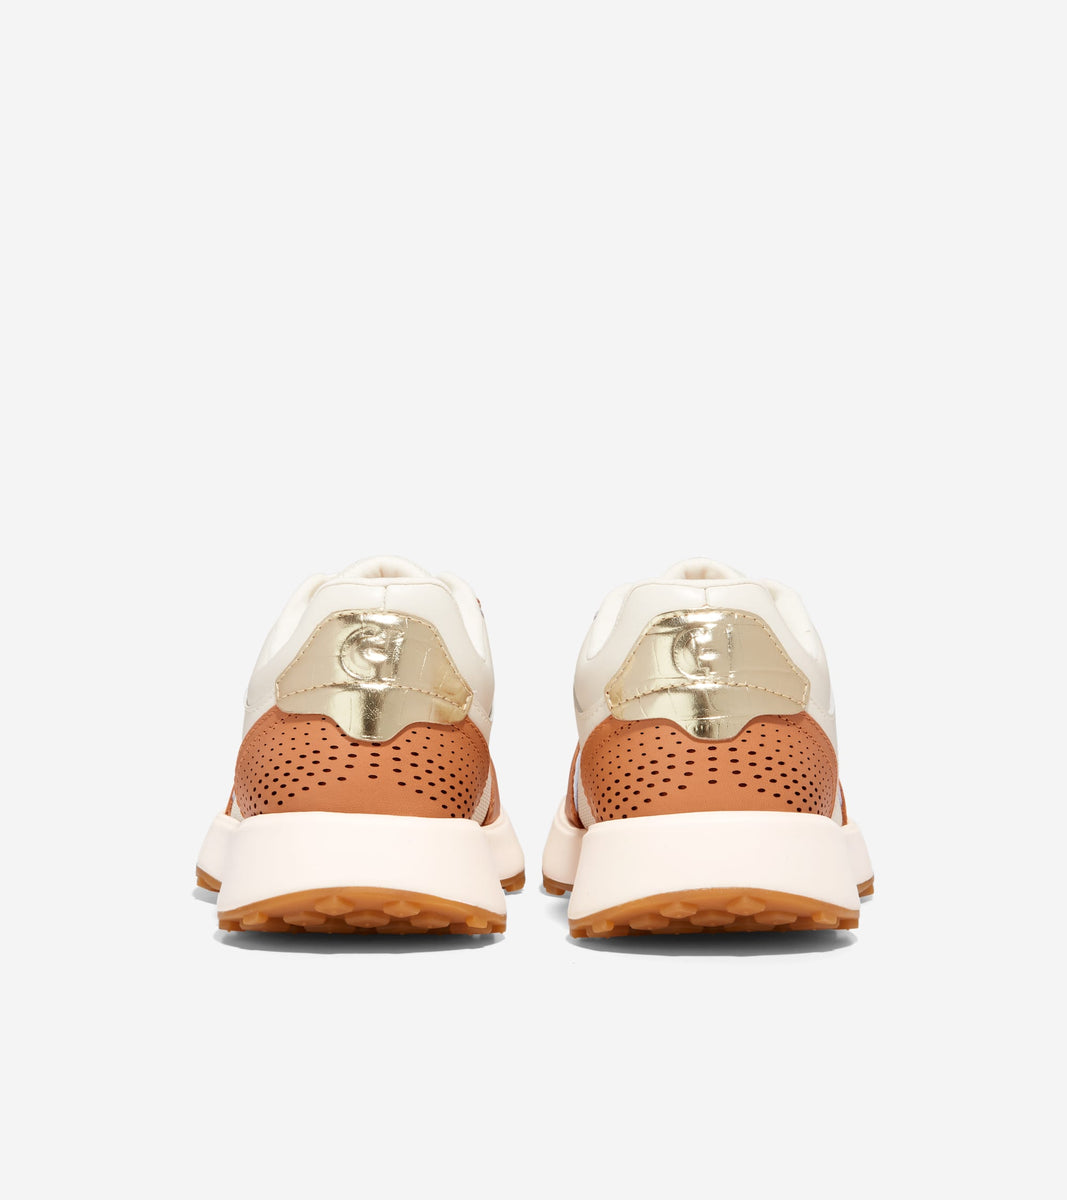 W29137:IVORY/NYLON/CH NATURAL TAN/TANGERINE SUEDE